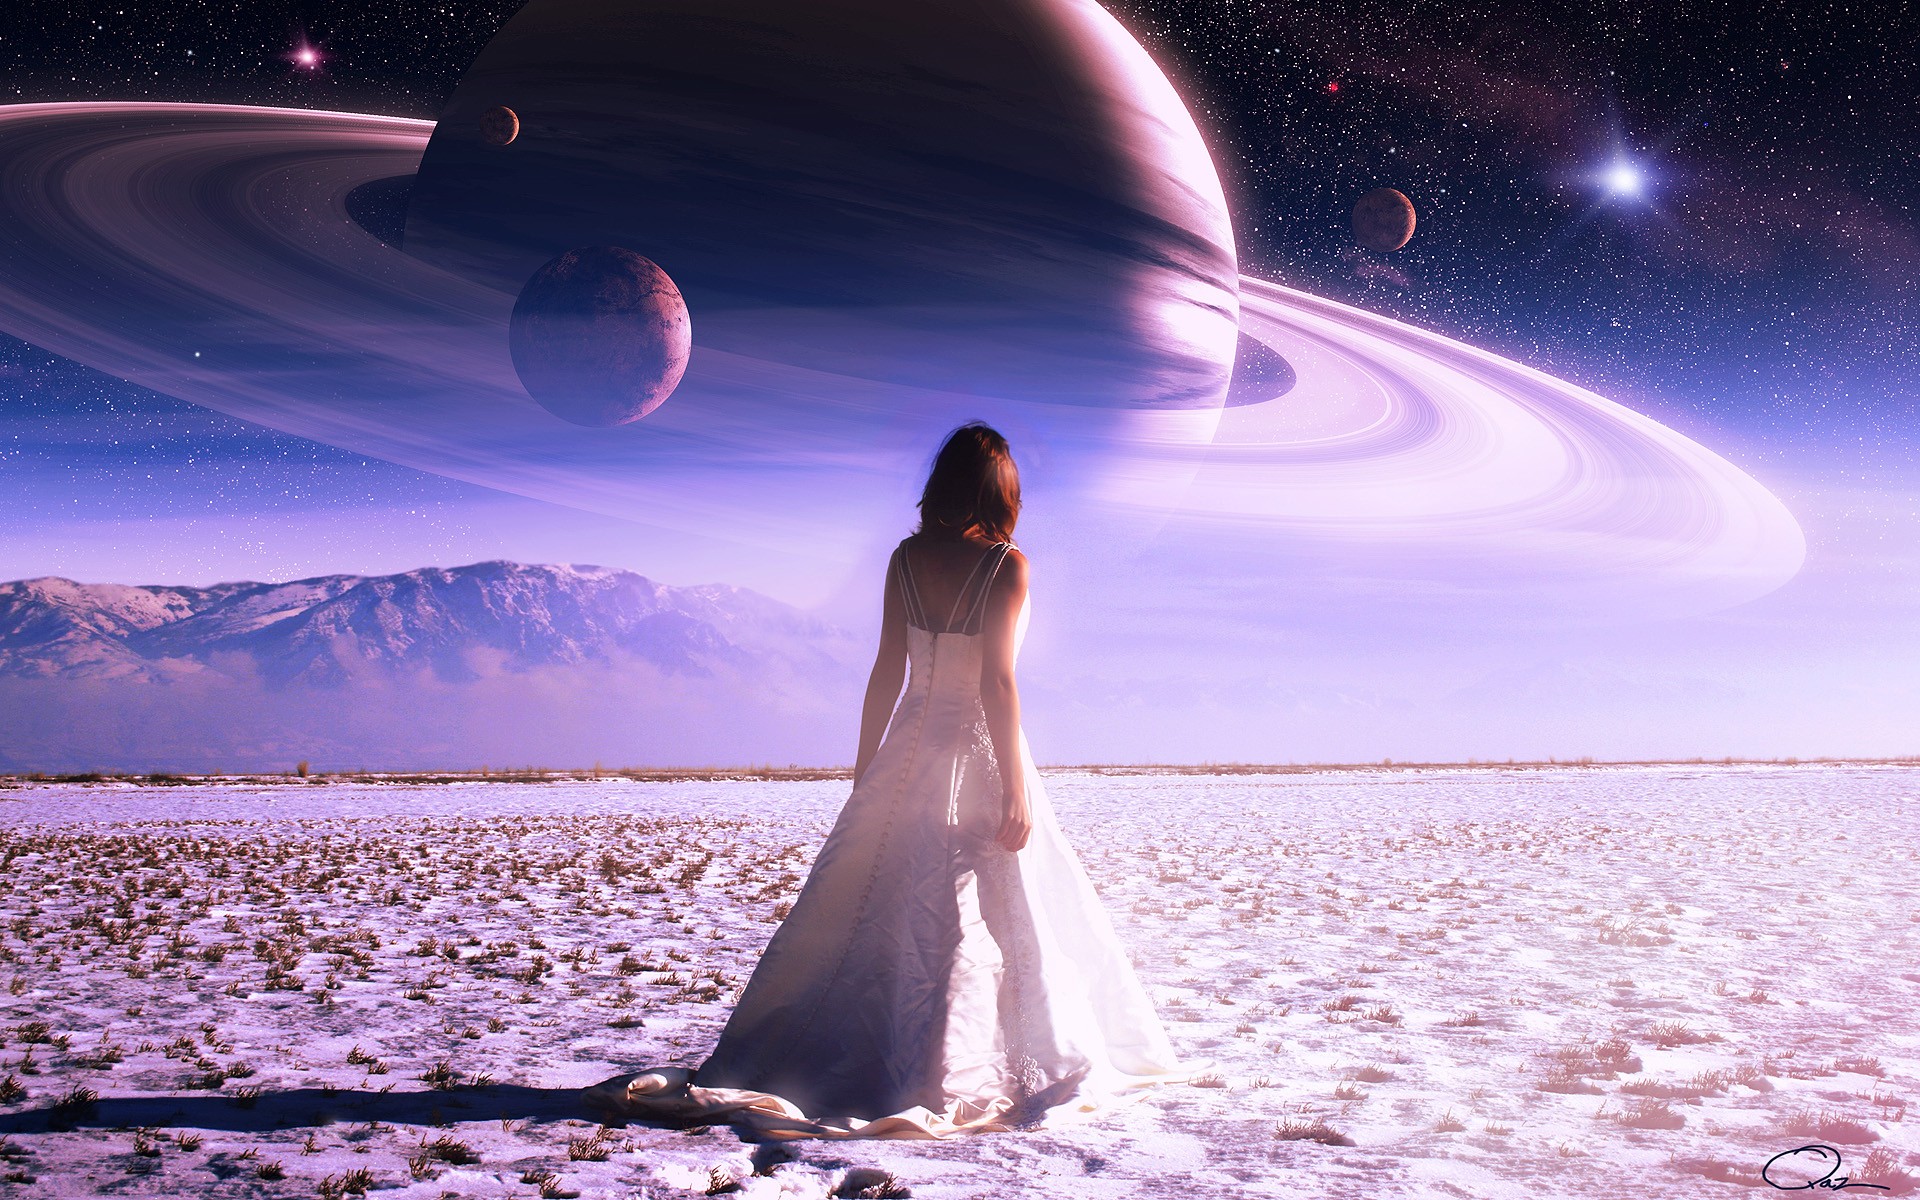 outer, Space, Planets, Fantasy, Art, Saturn, Digital, Art, Science